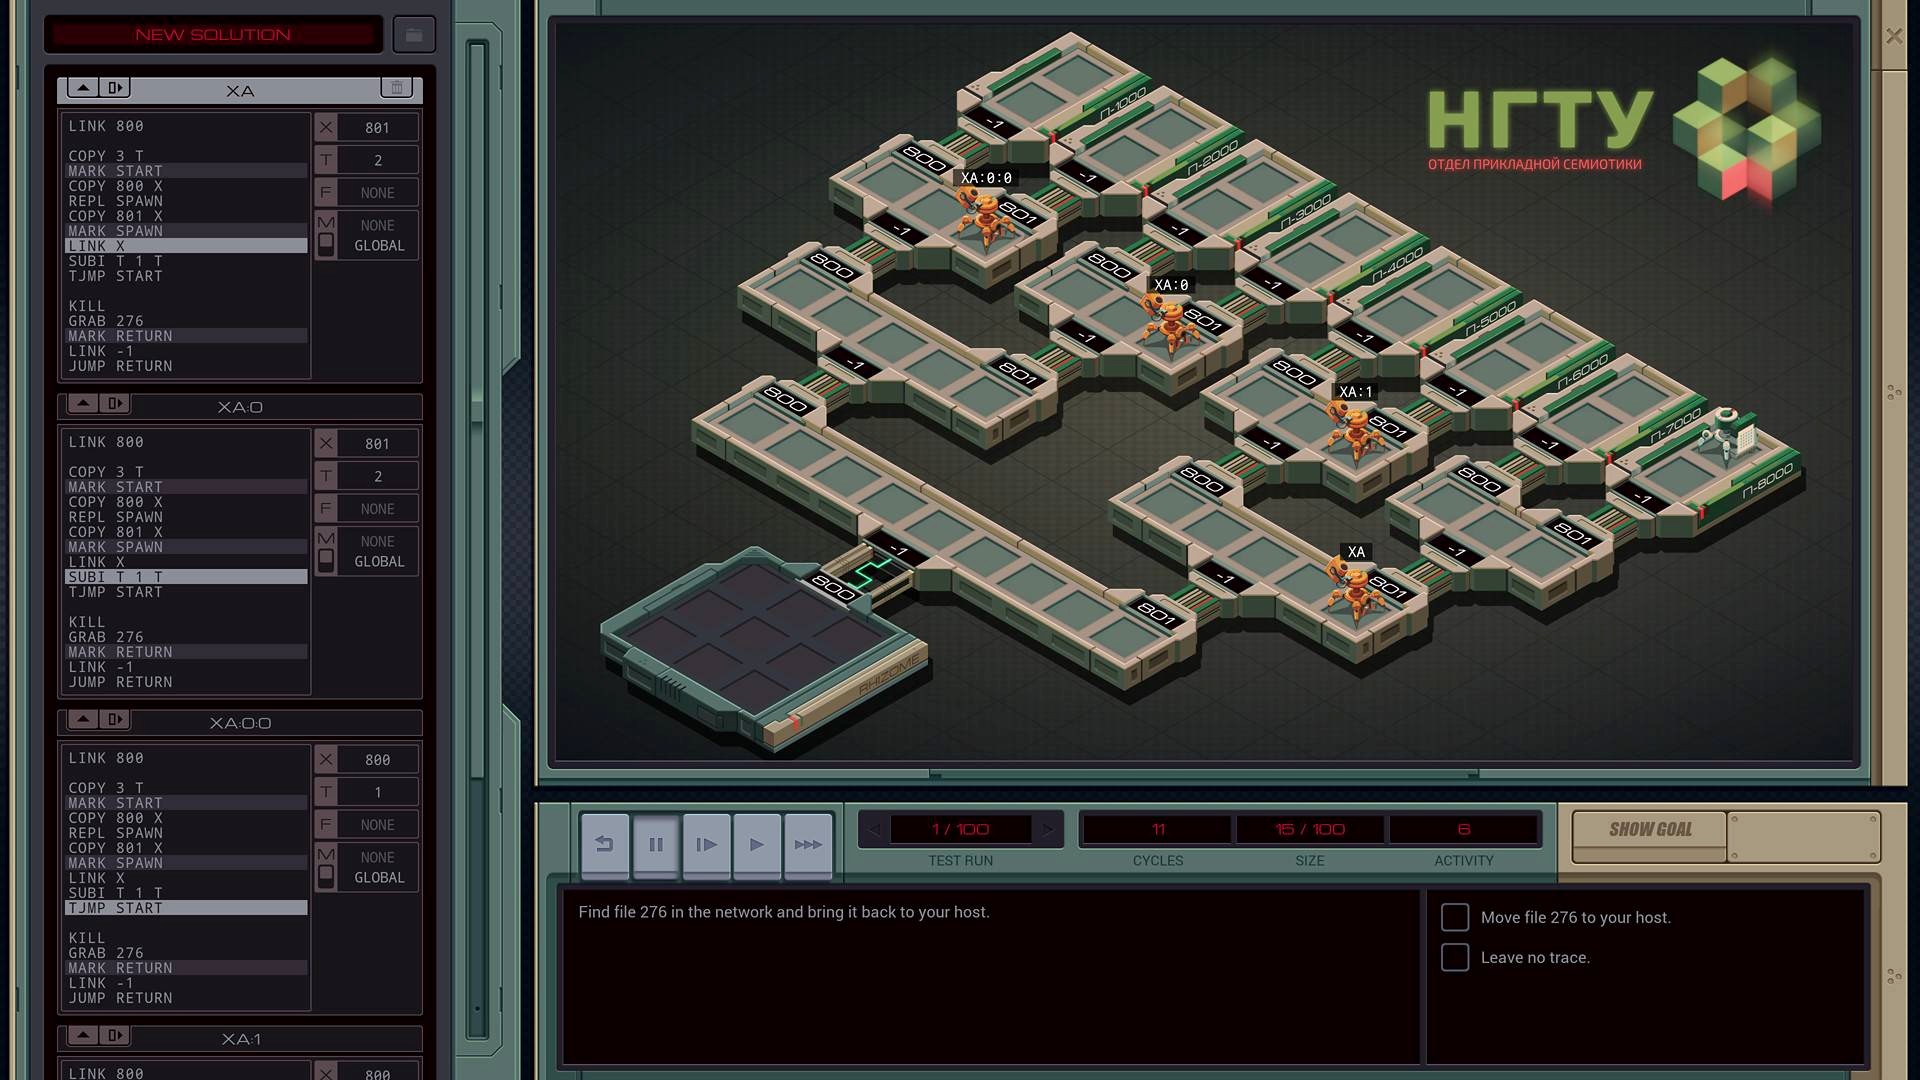 How to Make a Good Hacking Game When the Reality Is Massively Dull